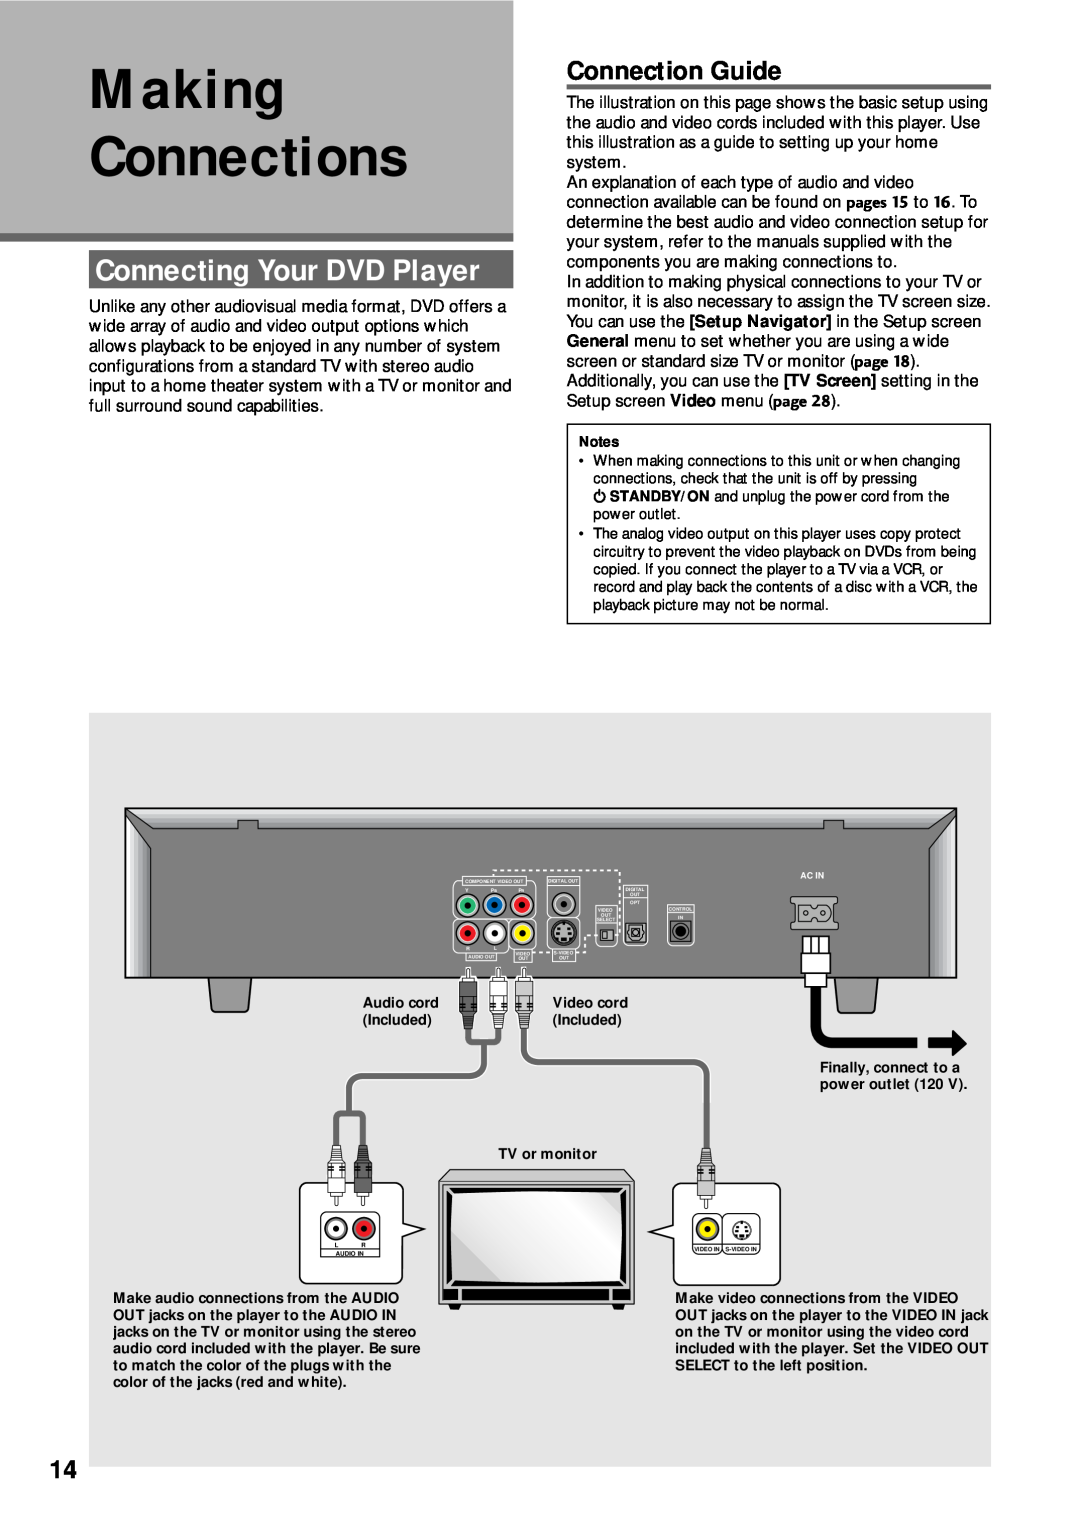 Pioneer DV-333 operating instructions Connecting Your DVD Player, Connection Guide, Making Connections 